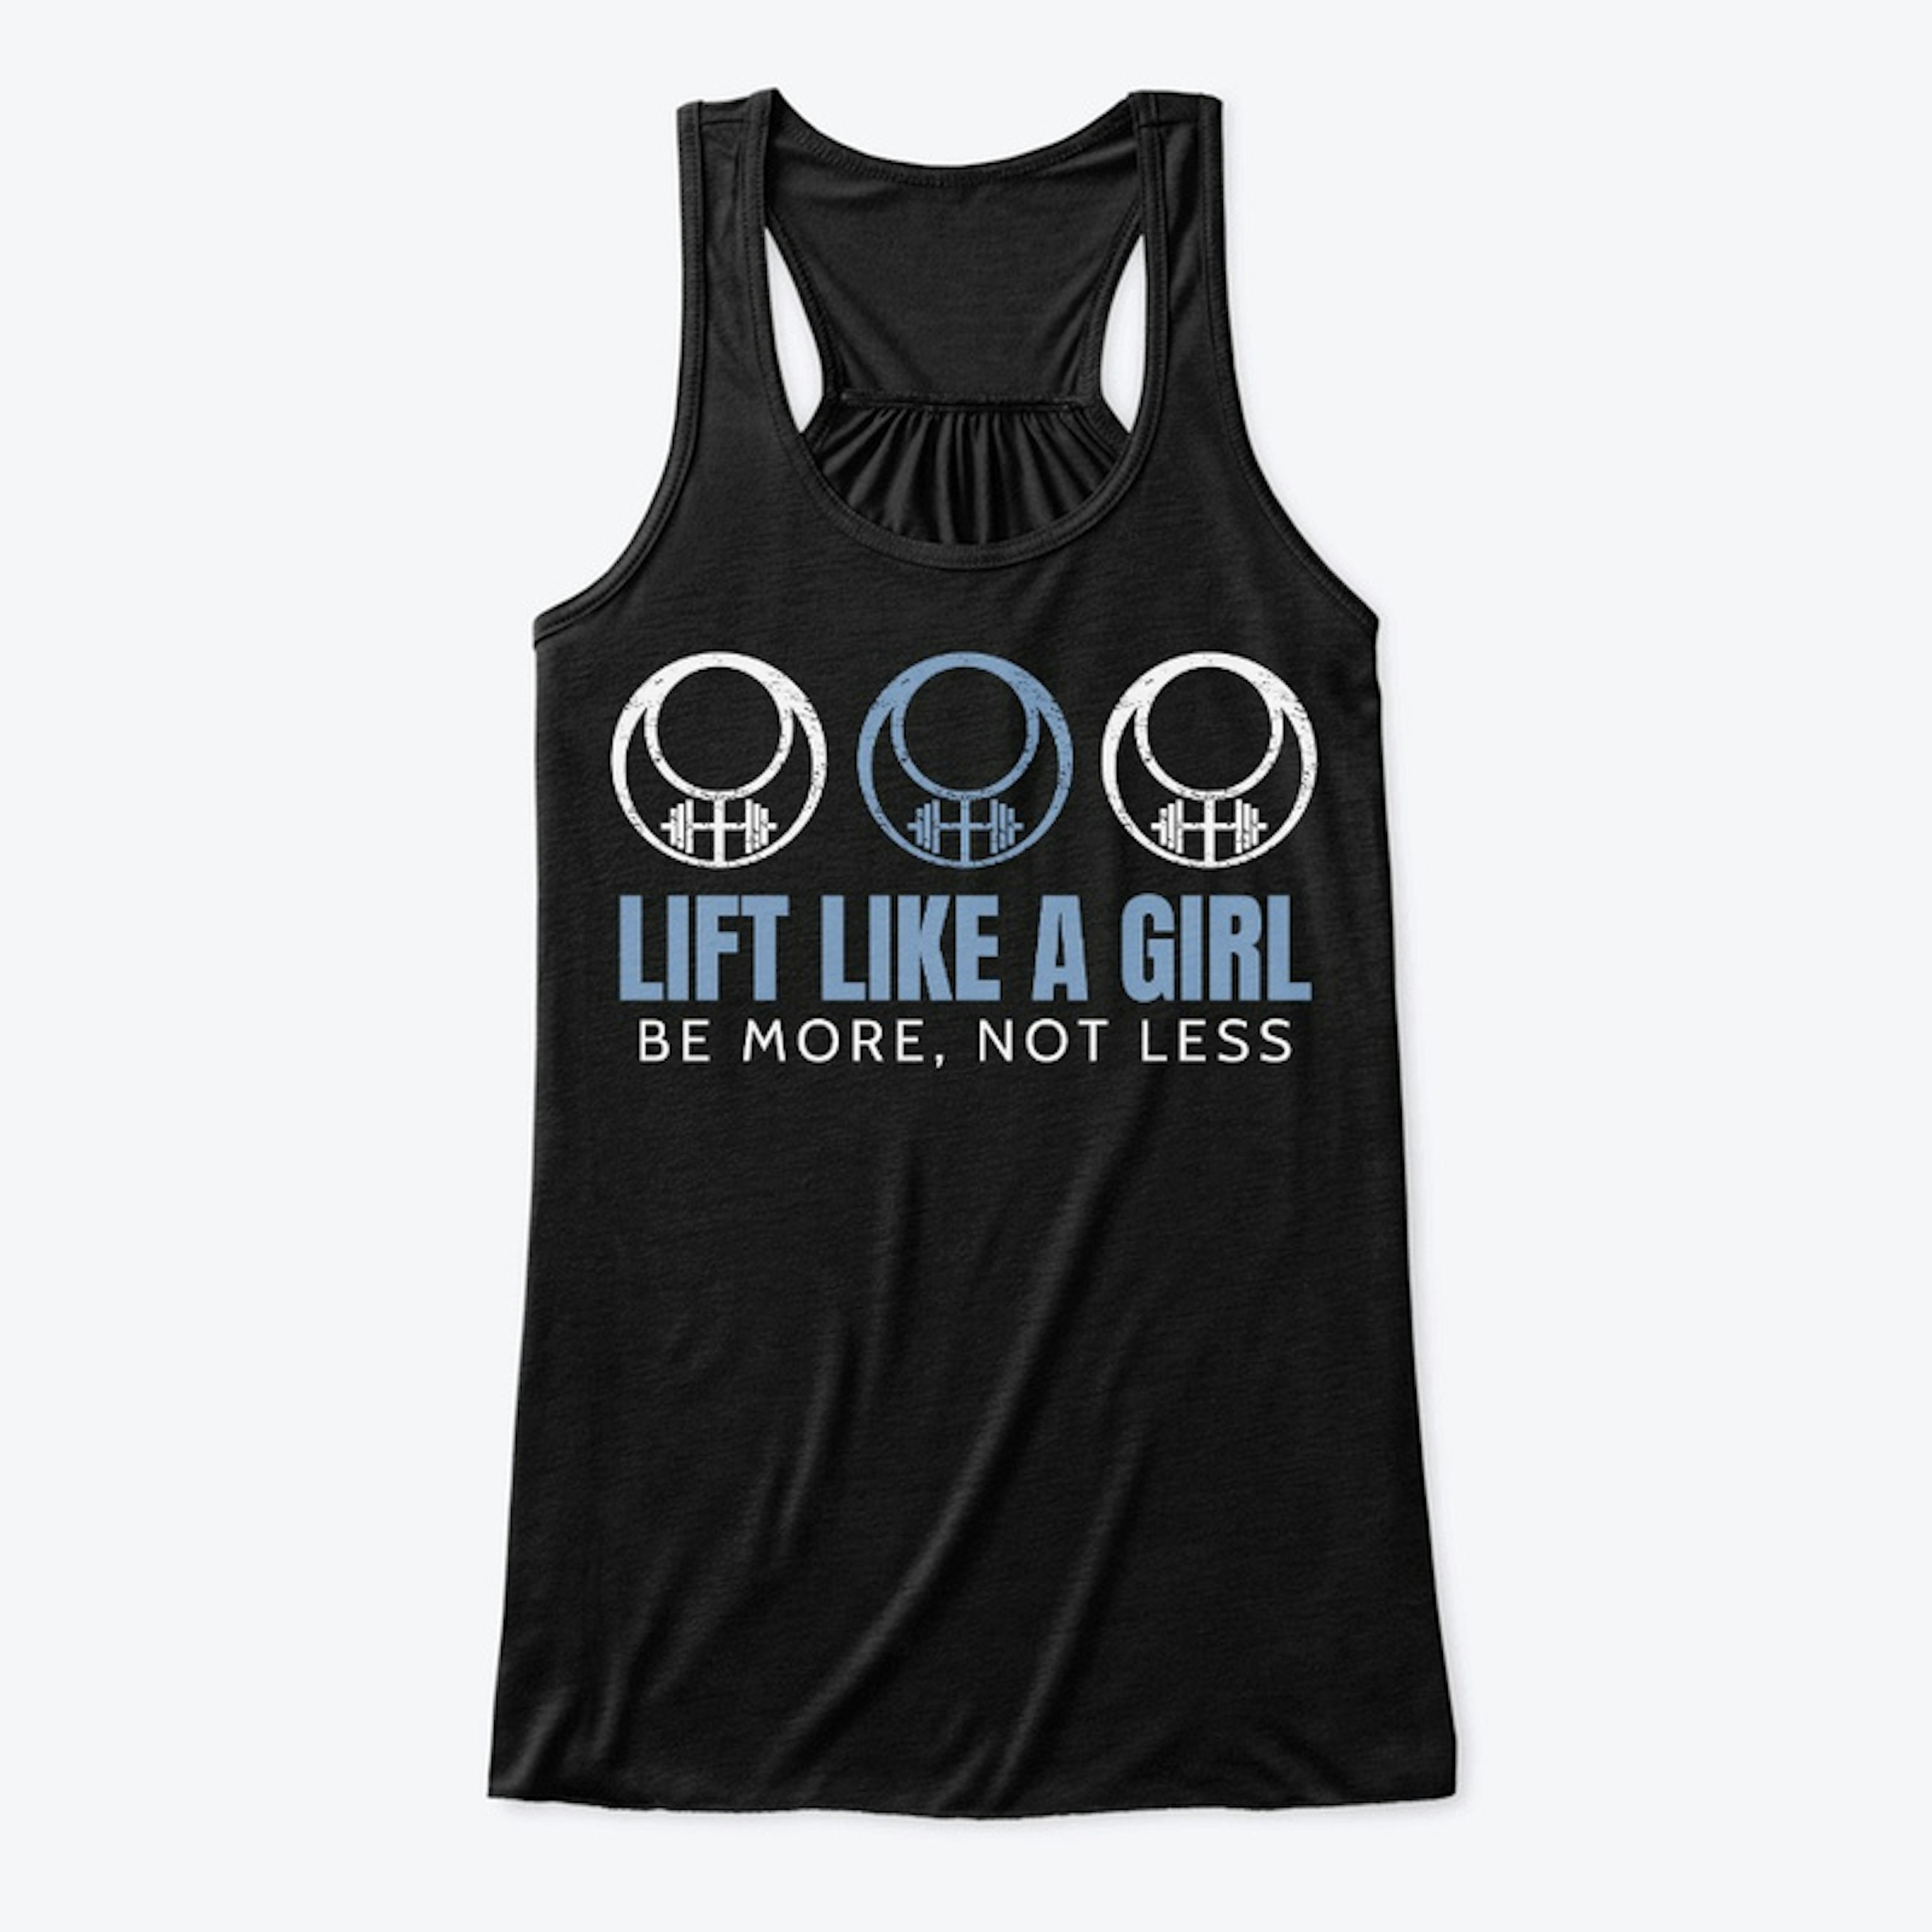 Lift Like a Girl: Be More, Not Less